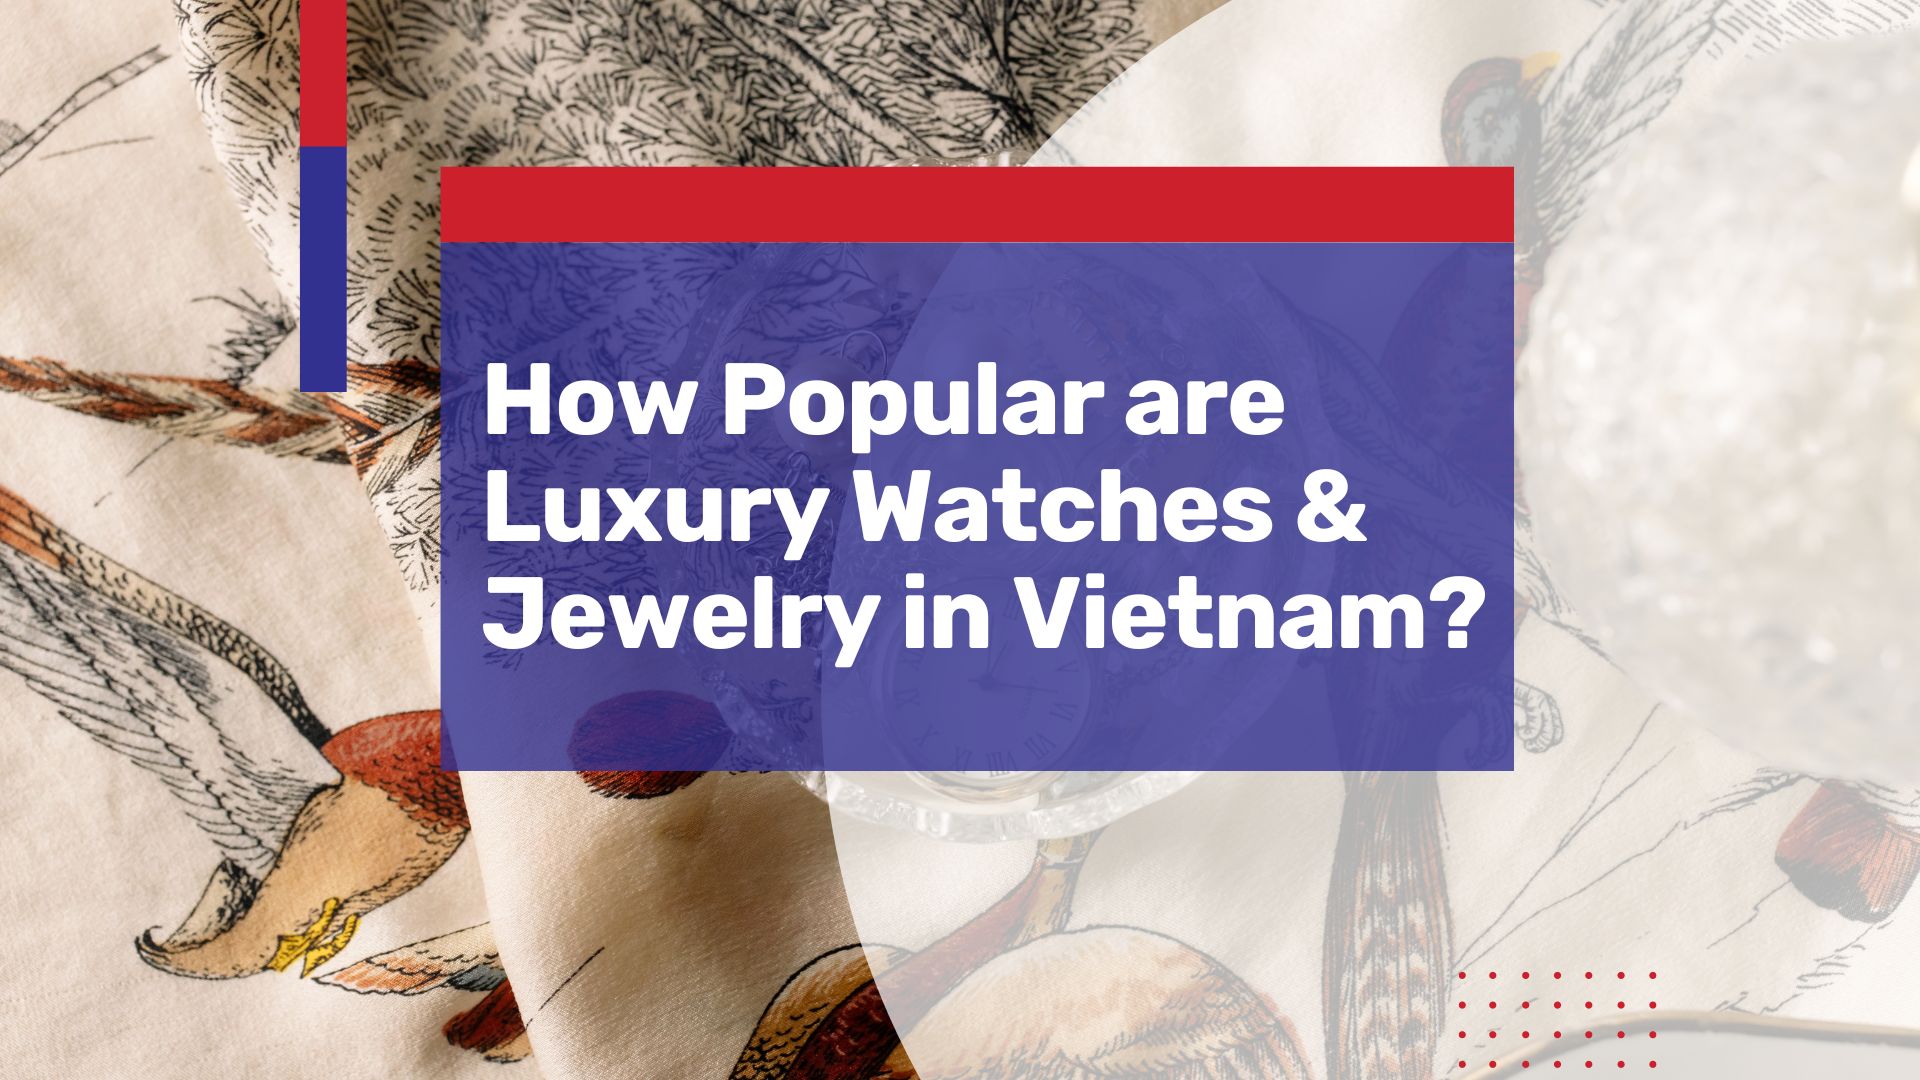 How Popular are Luxury Watches & Jewelry in Vietnam: Market Overview